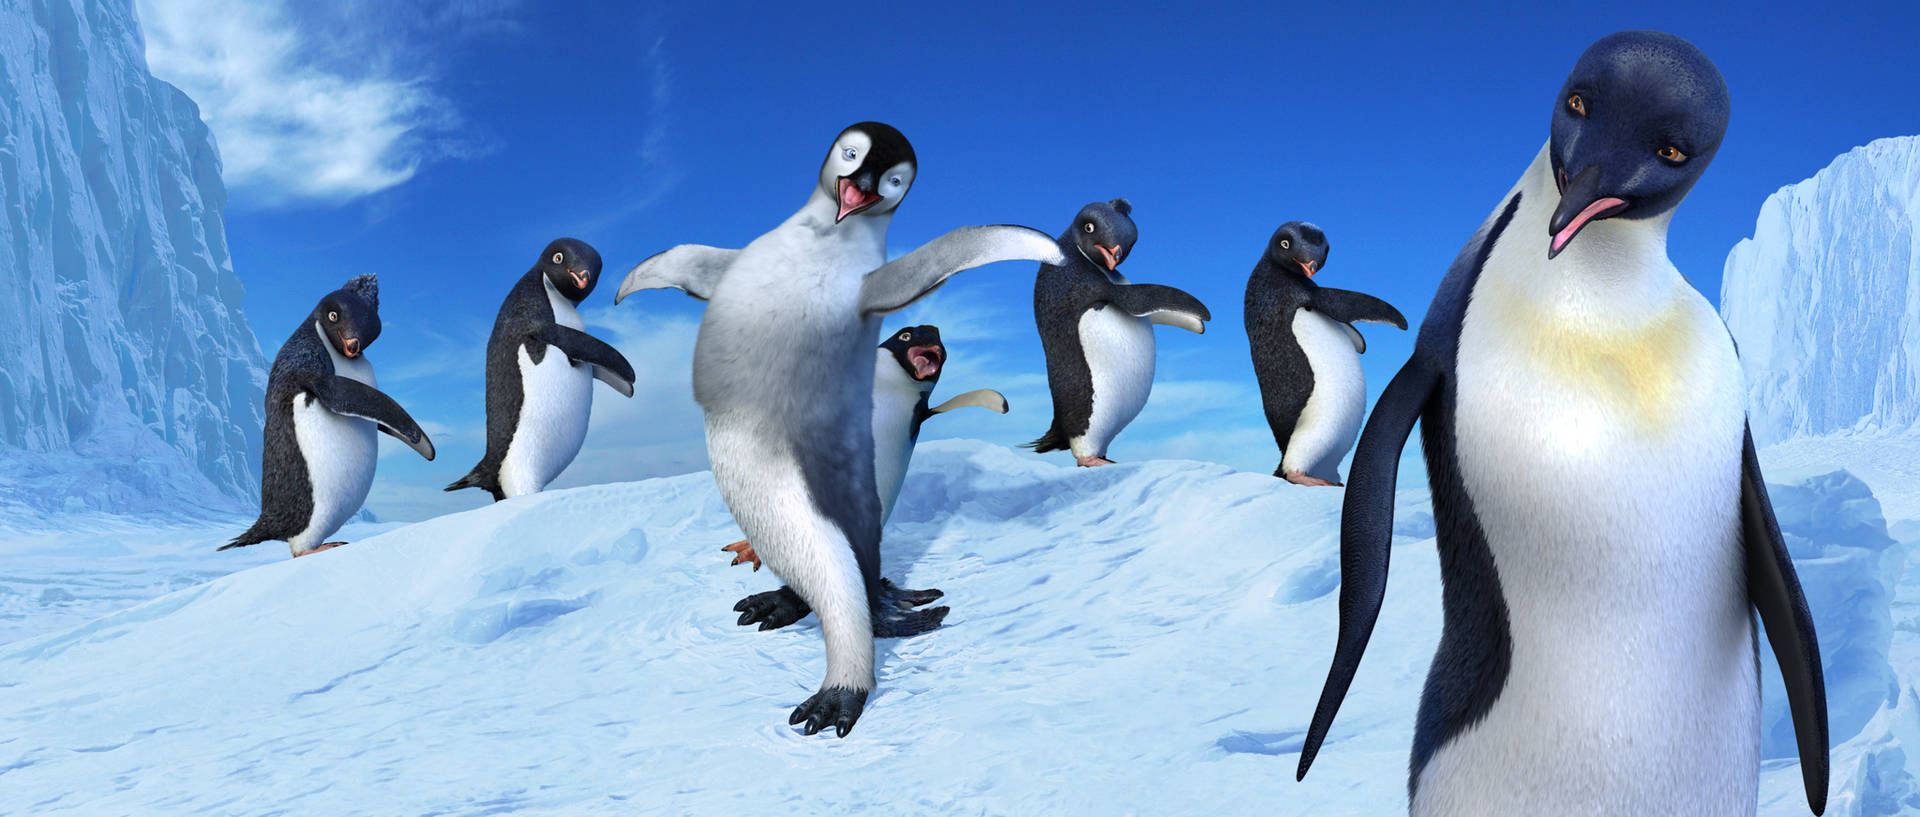 A Group Of Penguins Are Standing On The Snow Wallpaper